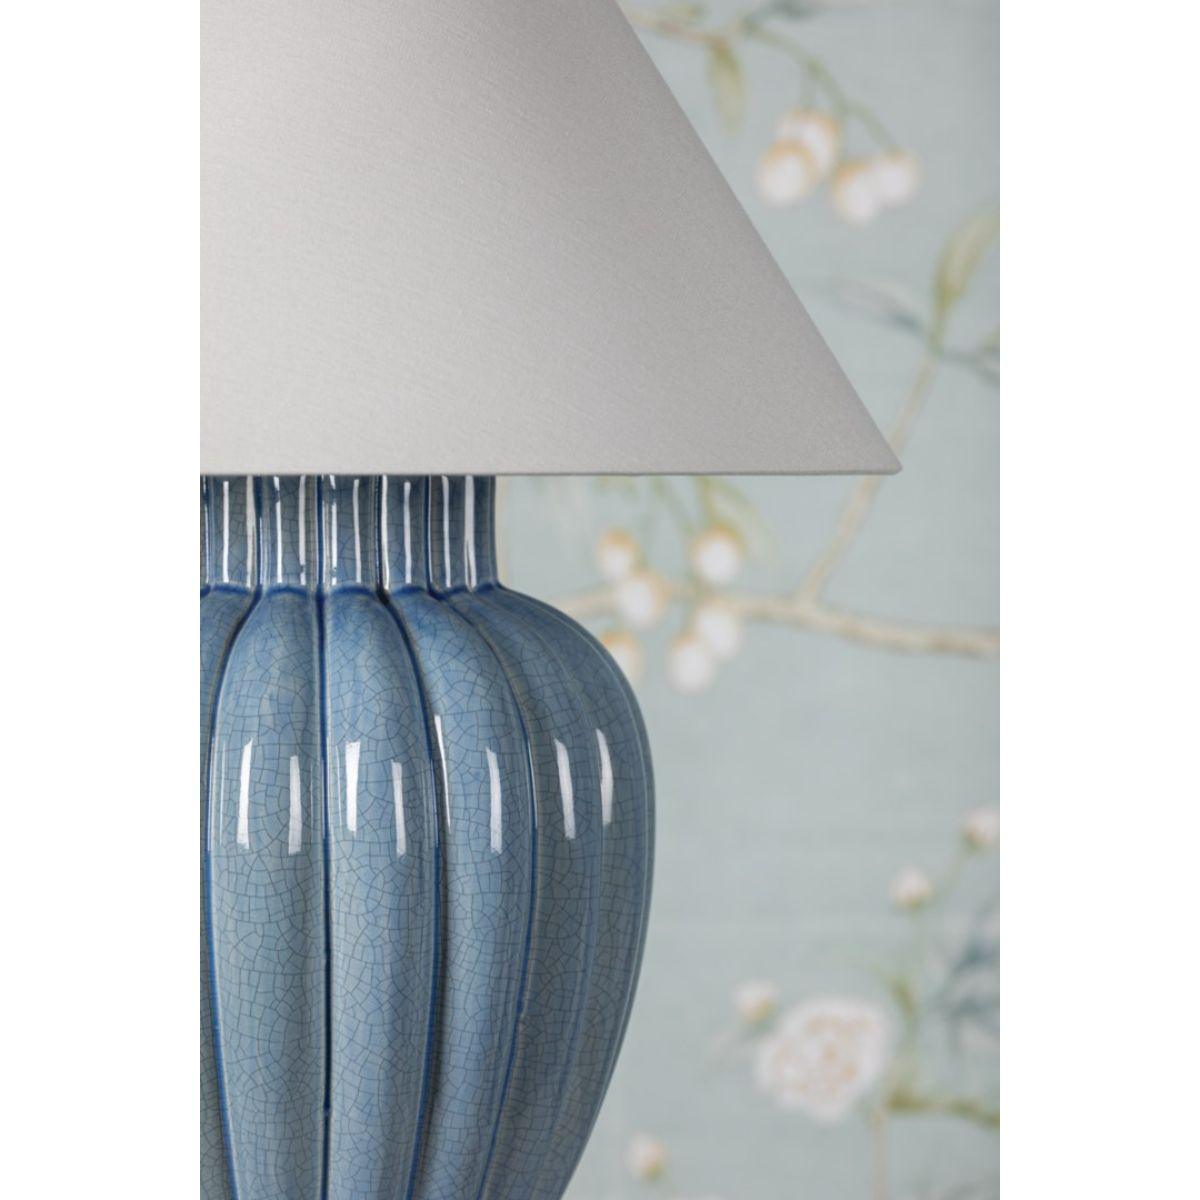 Clarendon Table Lamp Ceramic Ariel Okin Blue with Aged Brass Accents